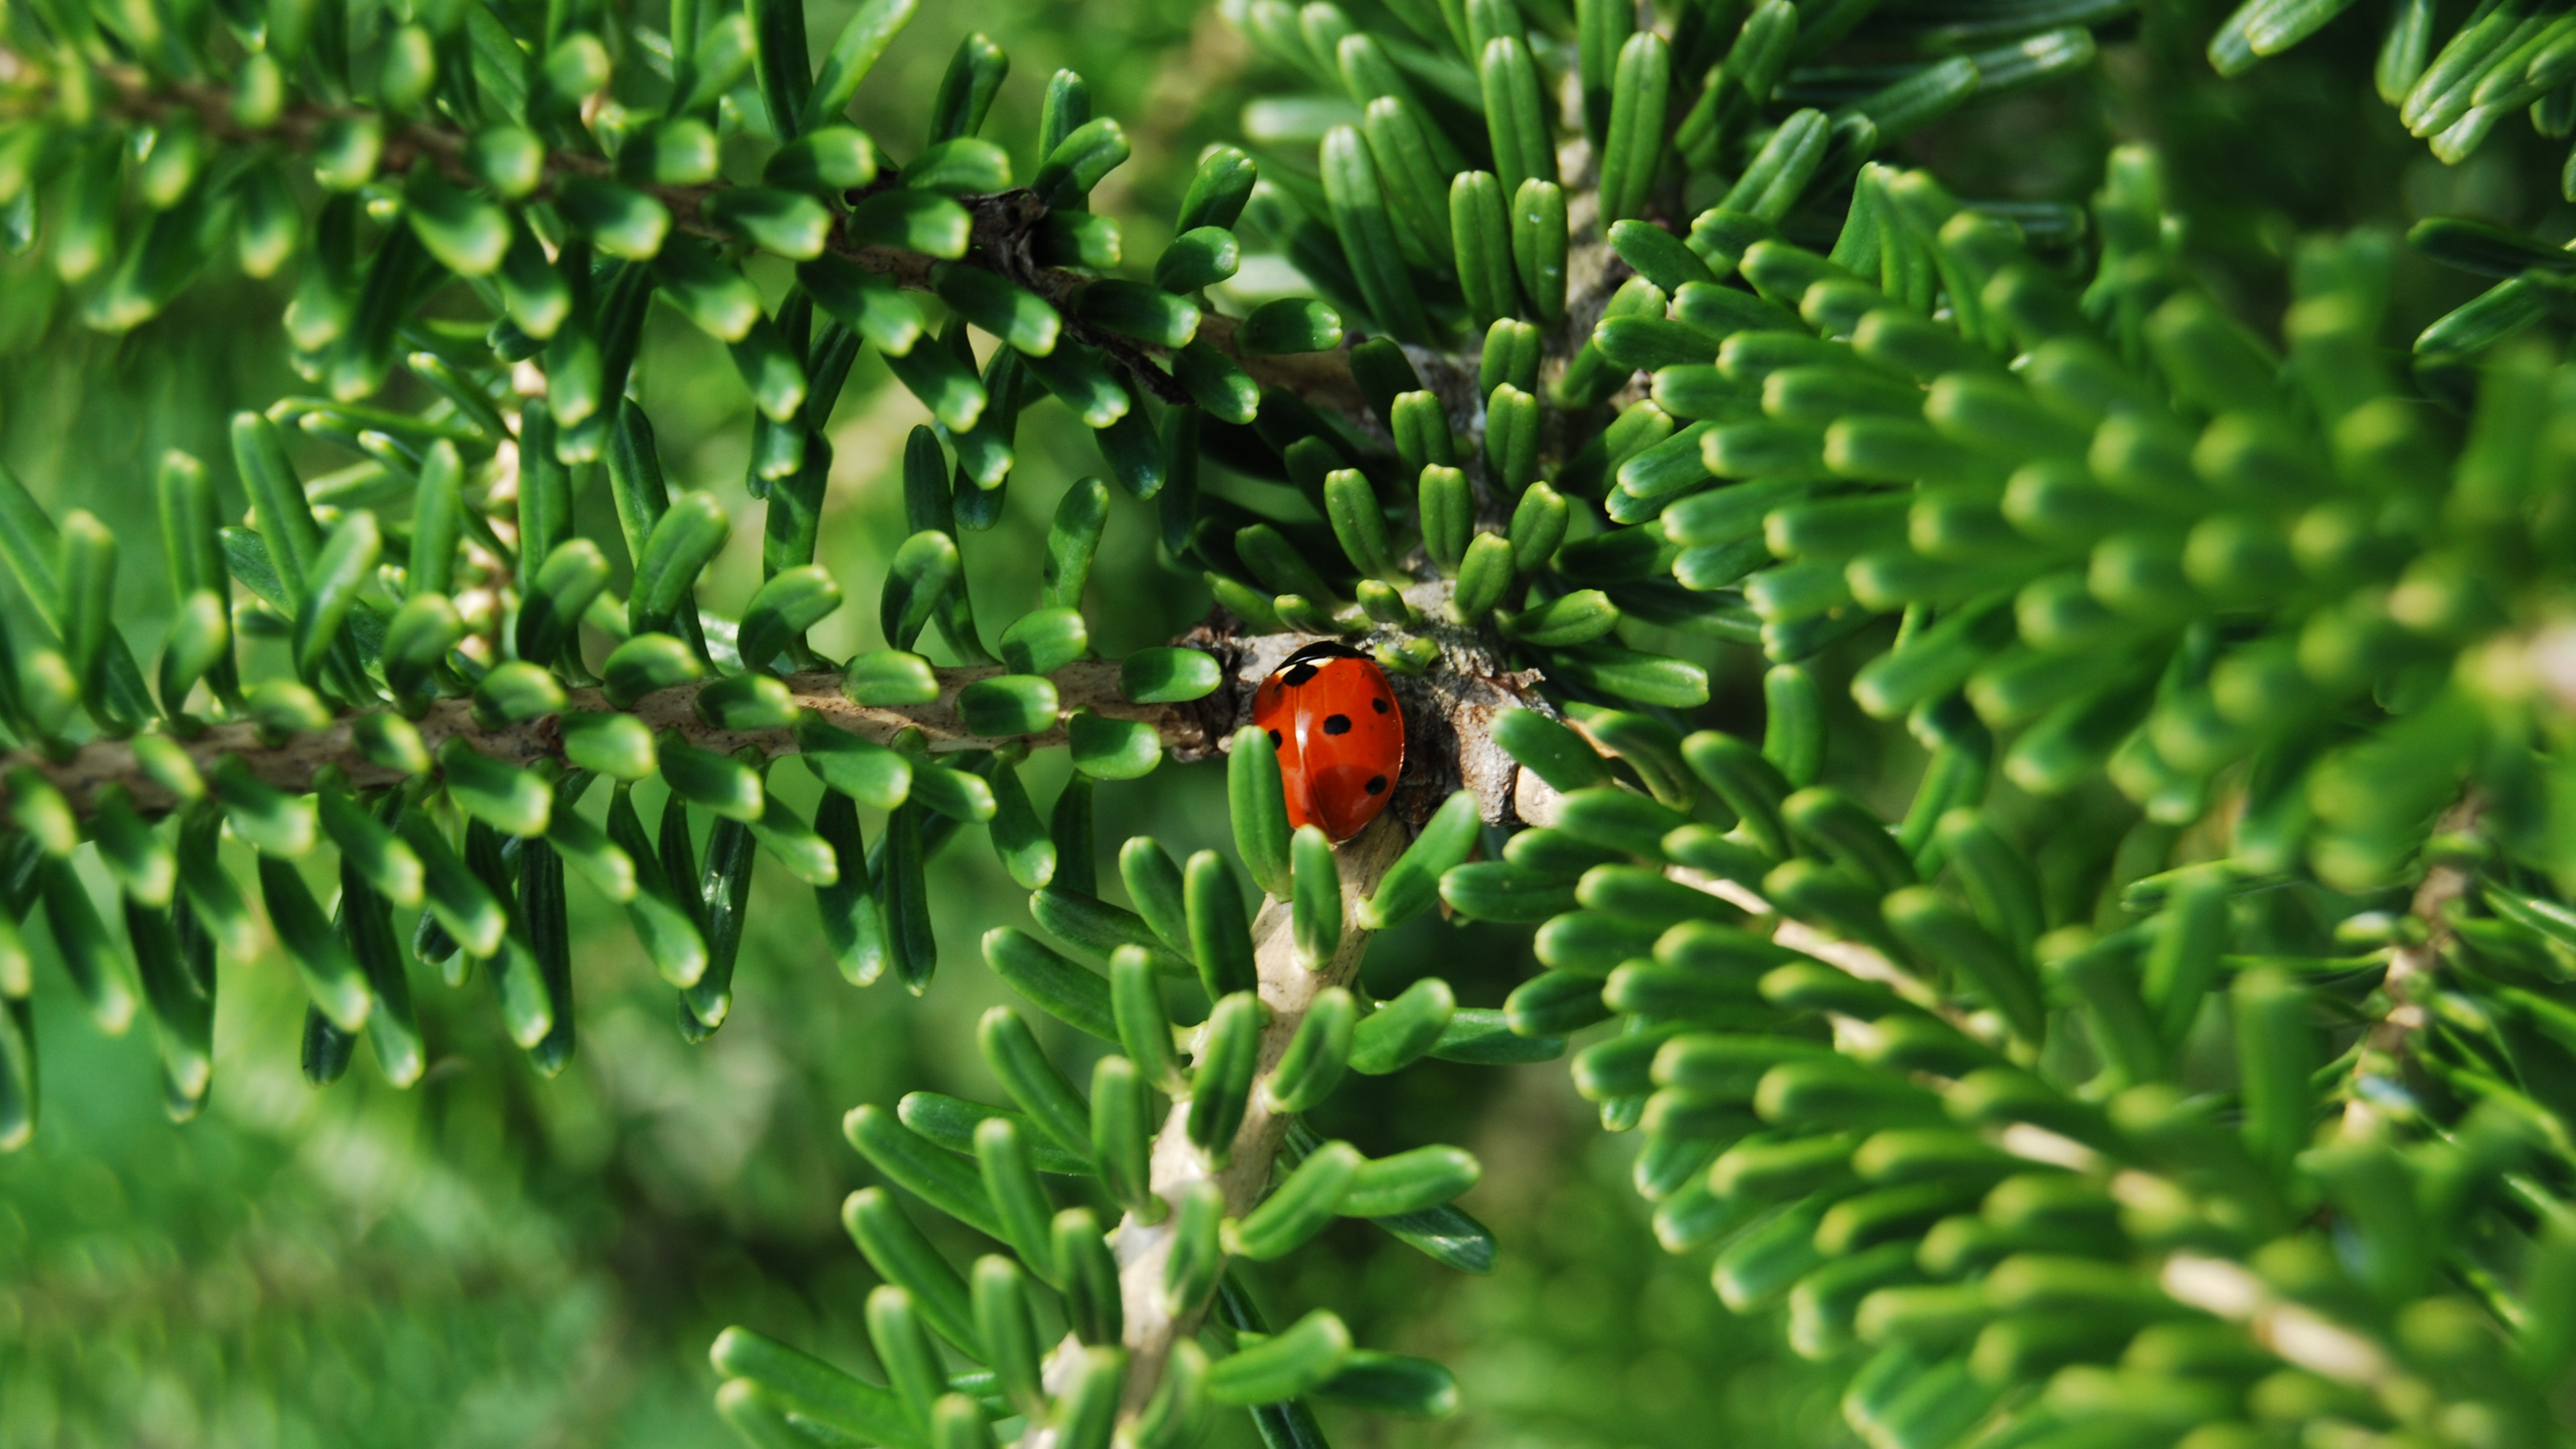 Red and Black Ladybug on Green Plant During Daytime. Wallpaper in 3840x2160 Resolution